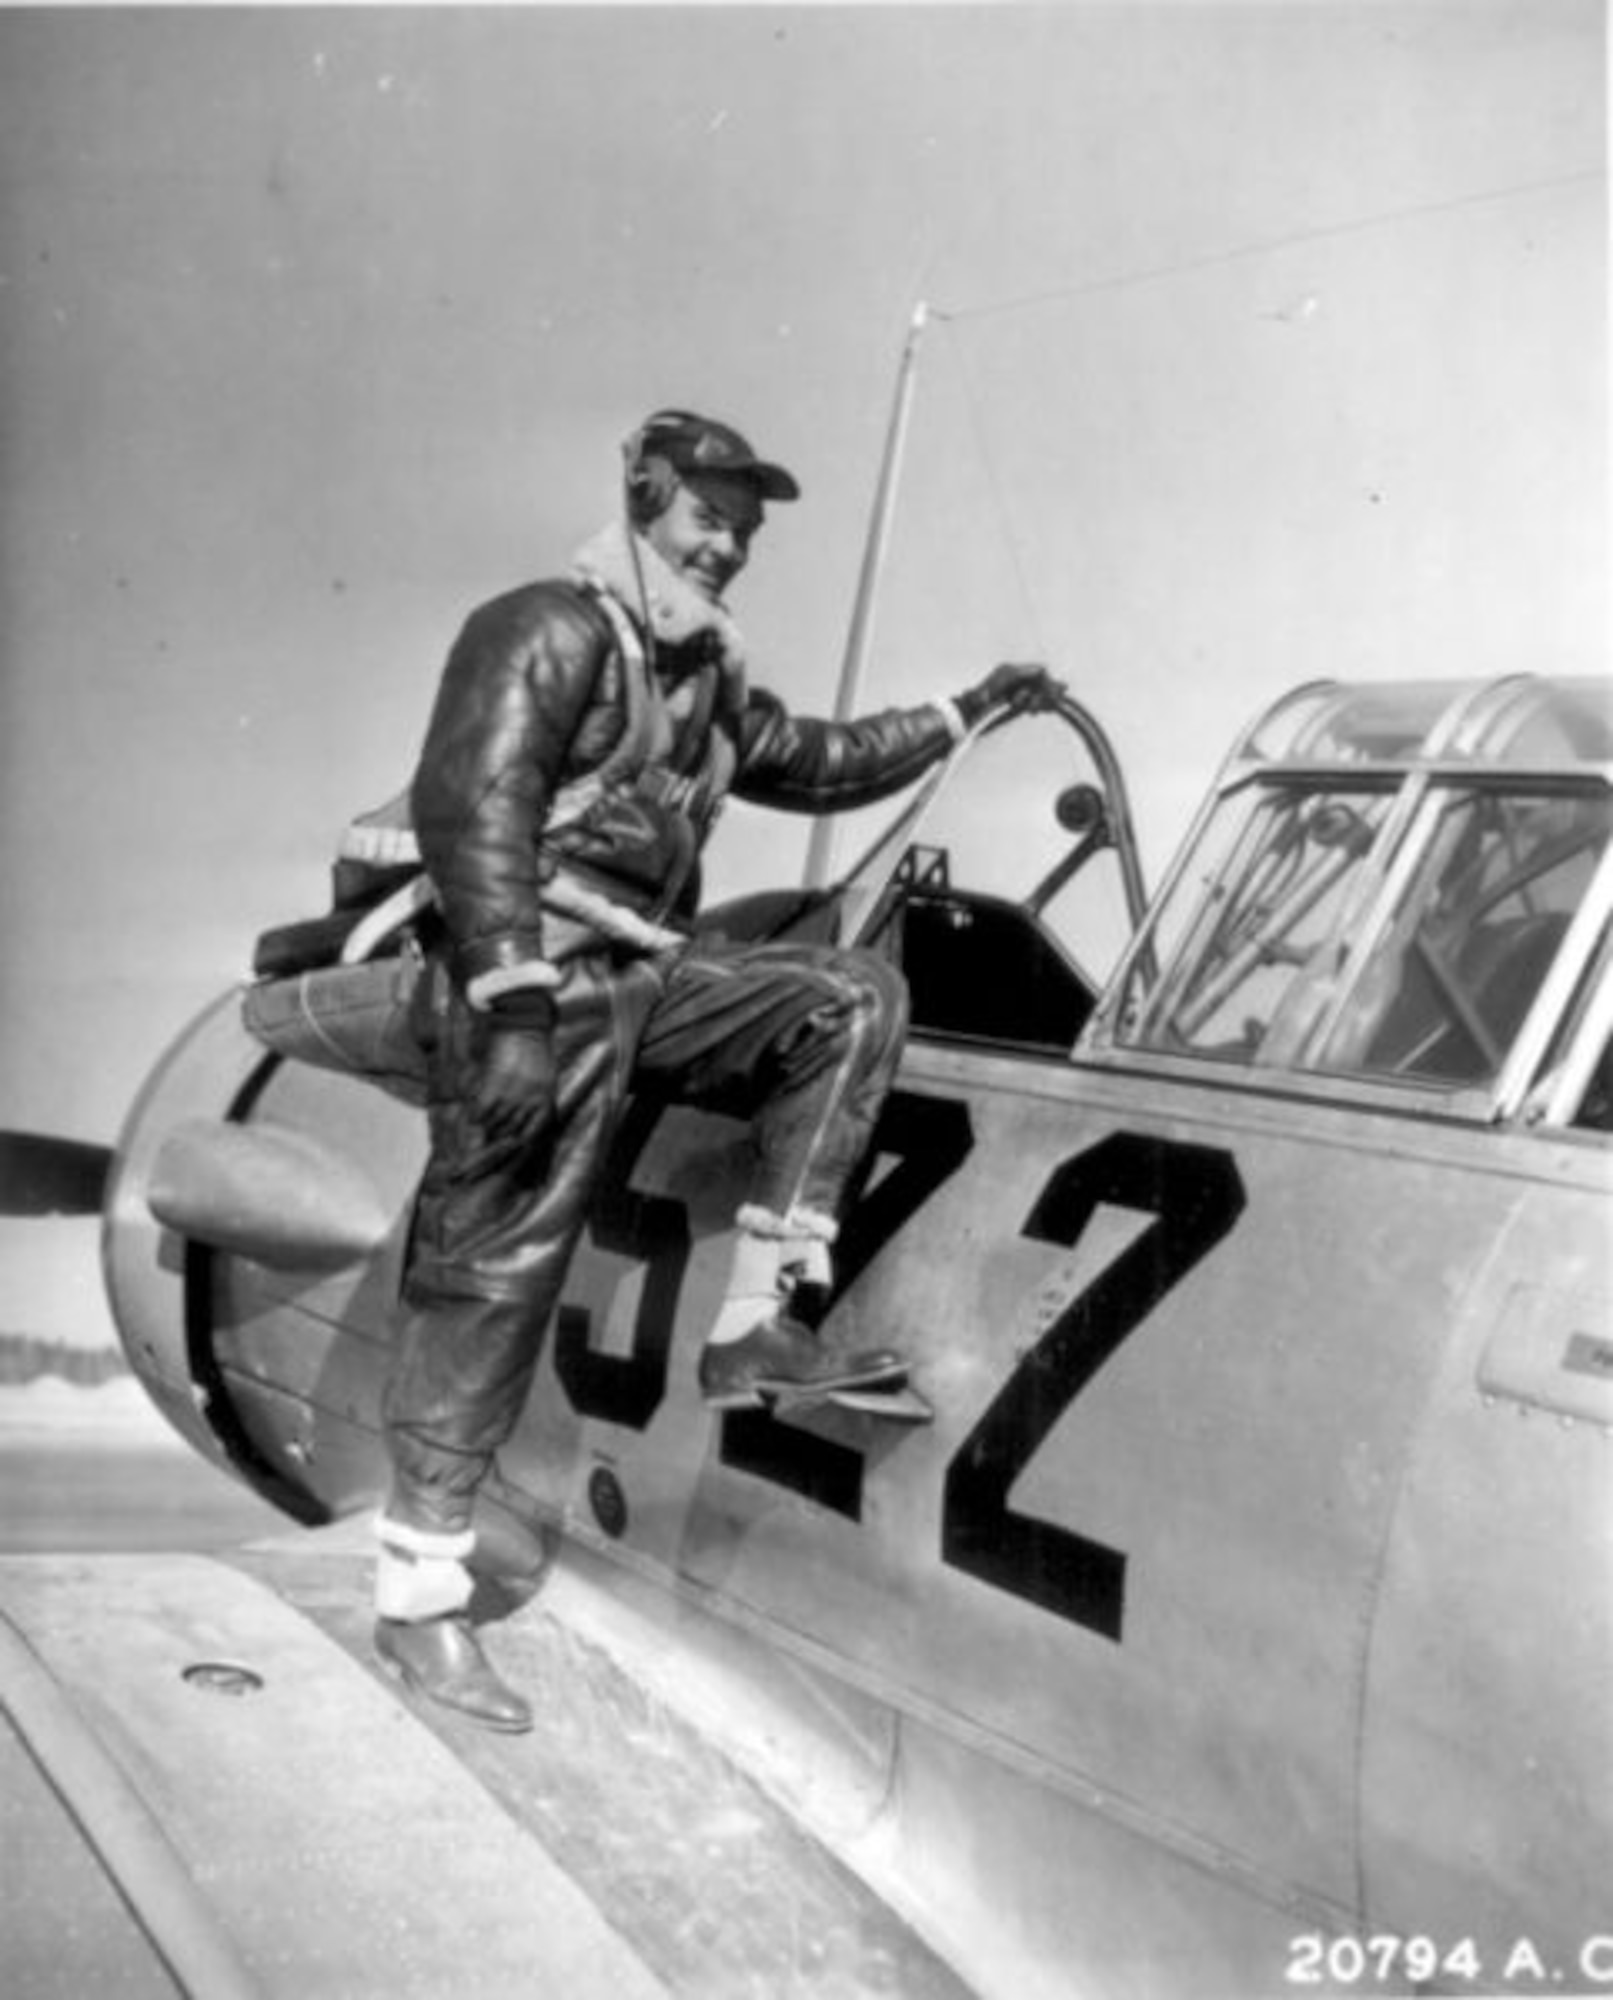 Benjamin O. Davis, an aviation pioneer and one of the most famous Tuskegee Airmen of World War II. (Air Force photo)